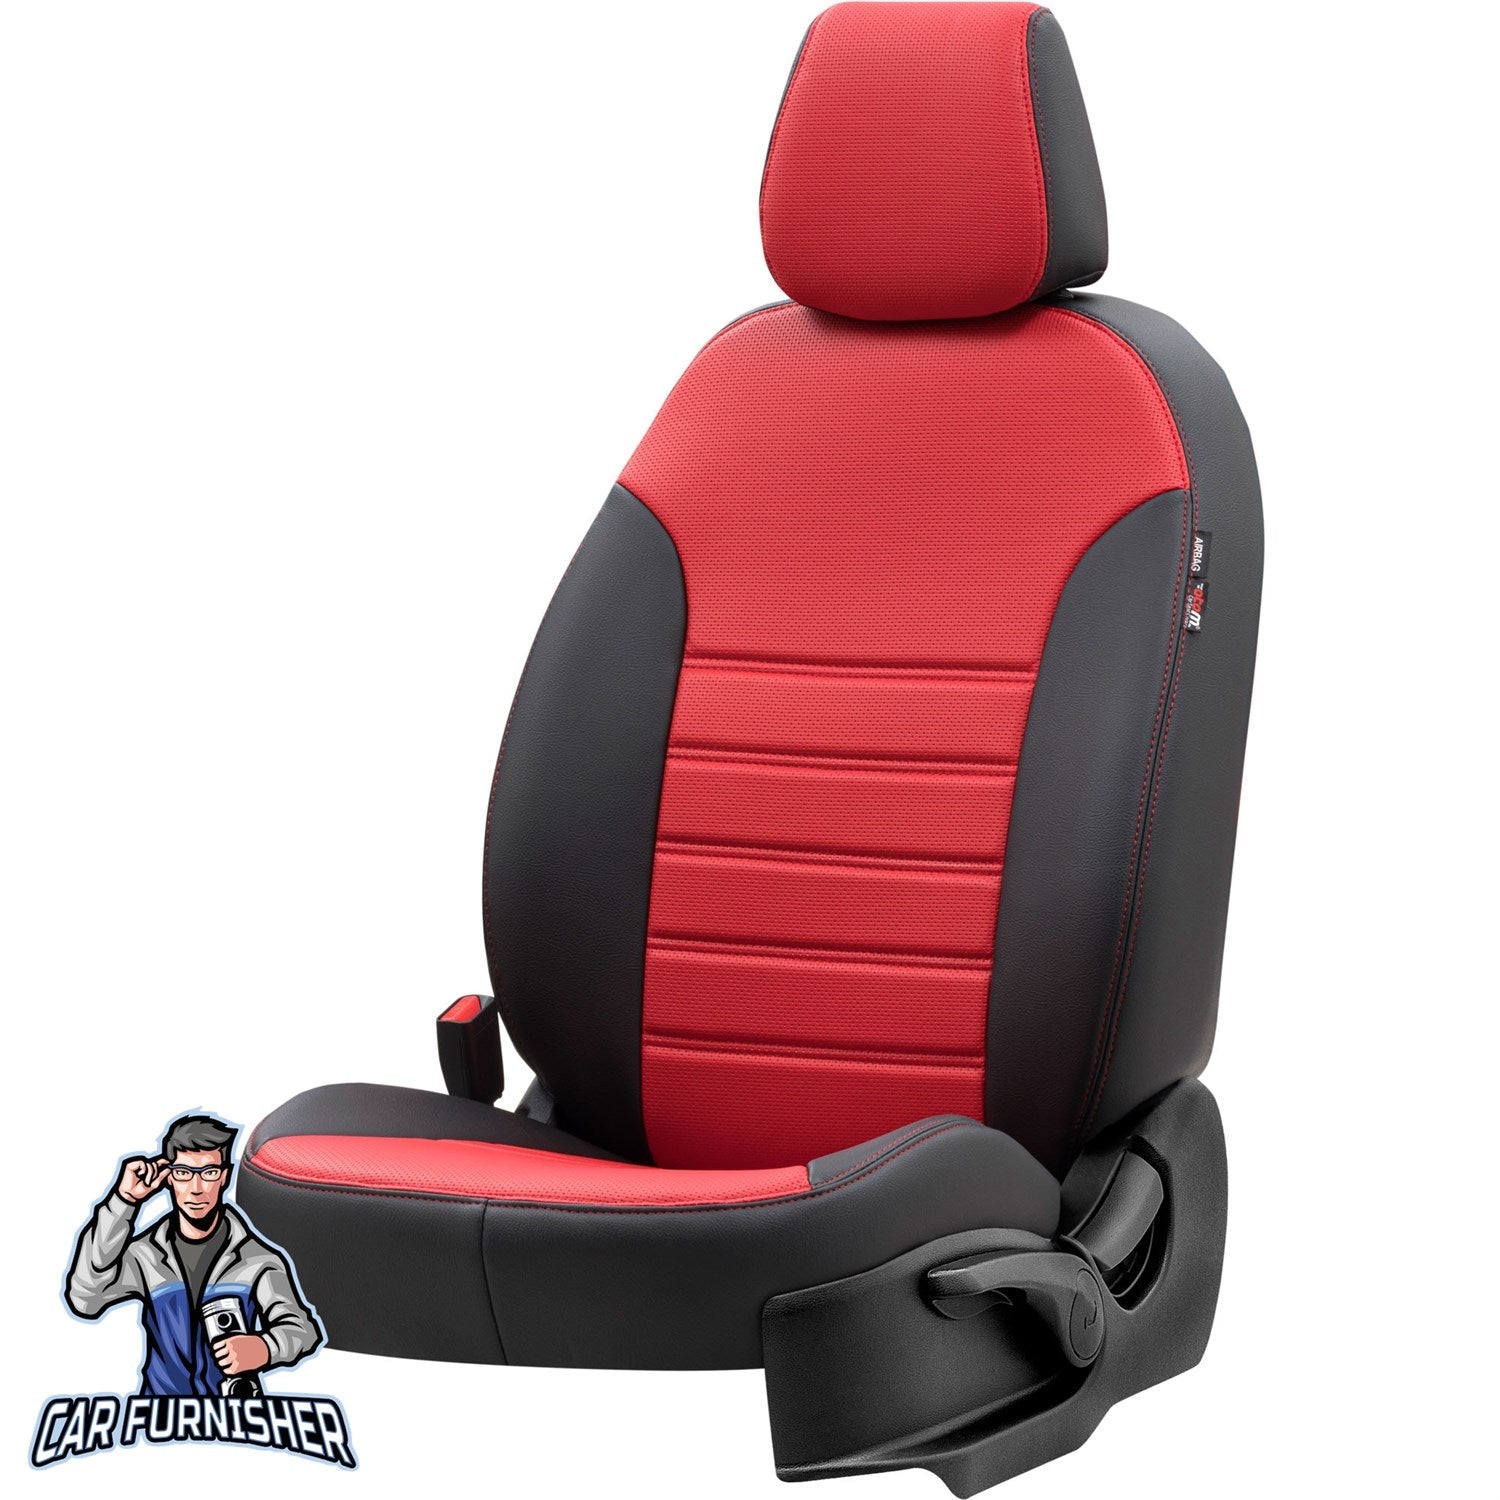 Mercedes ML Seat Covers New York Leather Design Red Leather